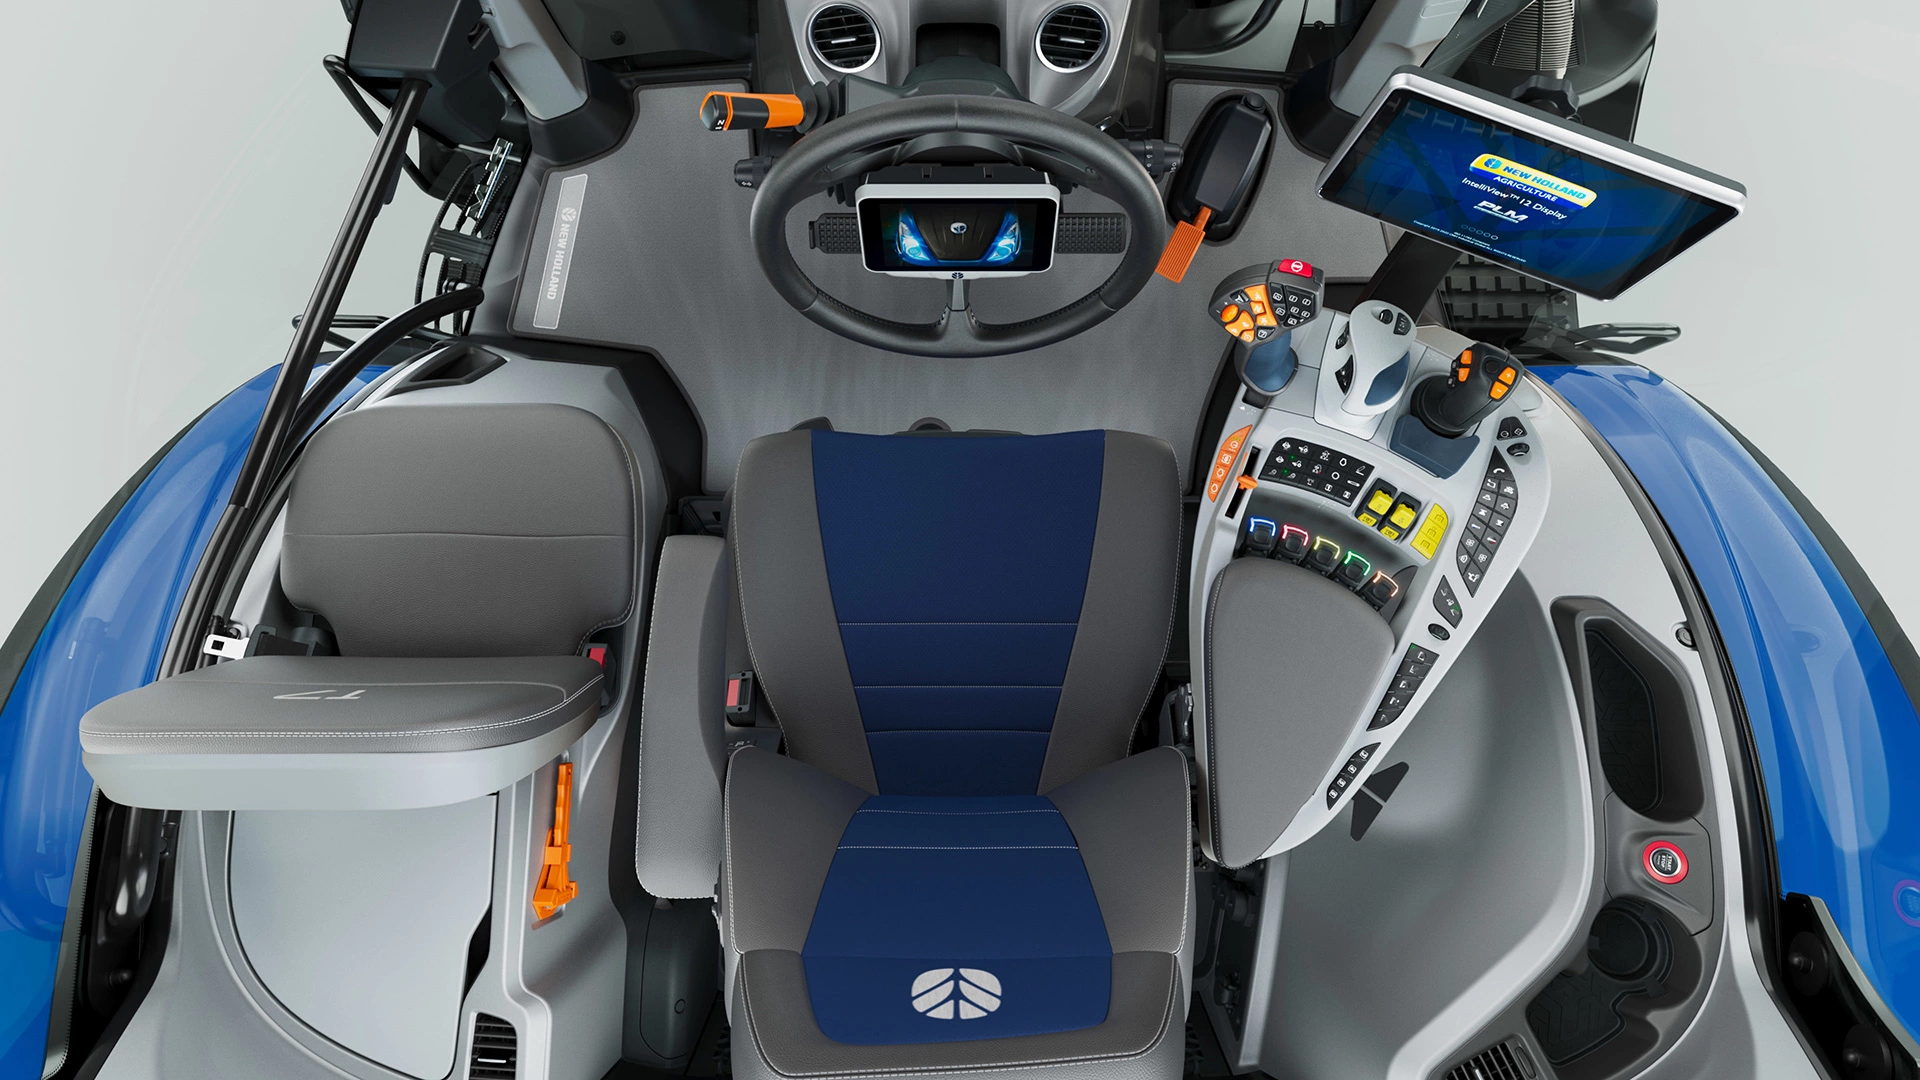 Detailed view of the inside of T7 Heavy Duty With PLM Intelligence agricultural tractor's cockpit